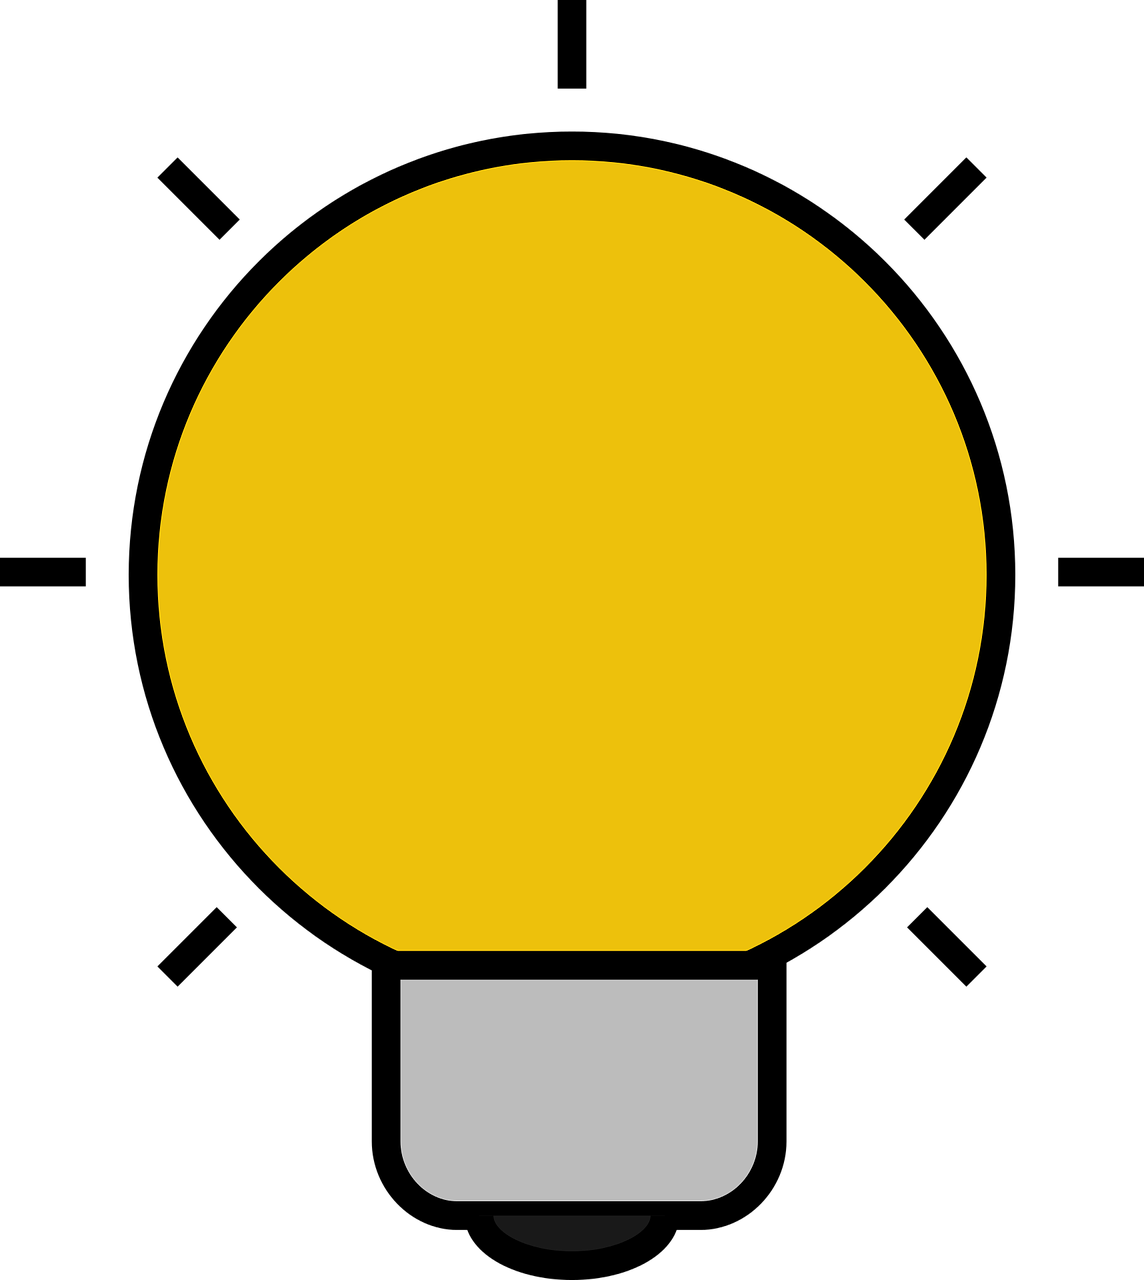 A Yellow Light Bulb With Grey Base